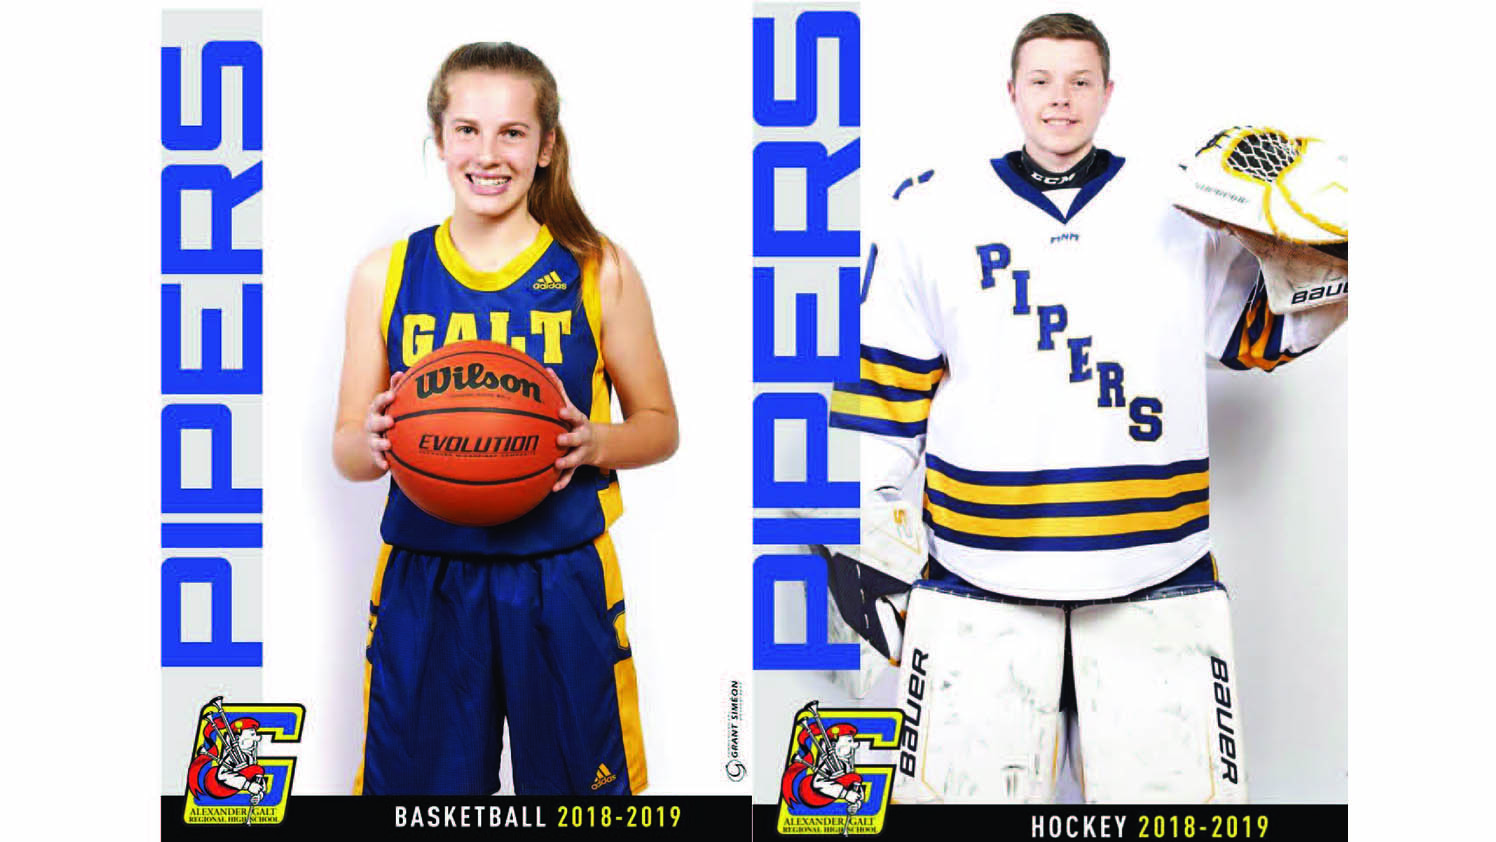 Gilbert and Fisk named Piper athletes of the month